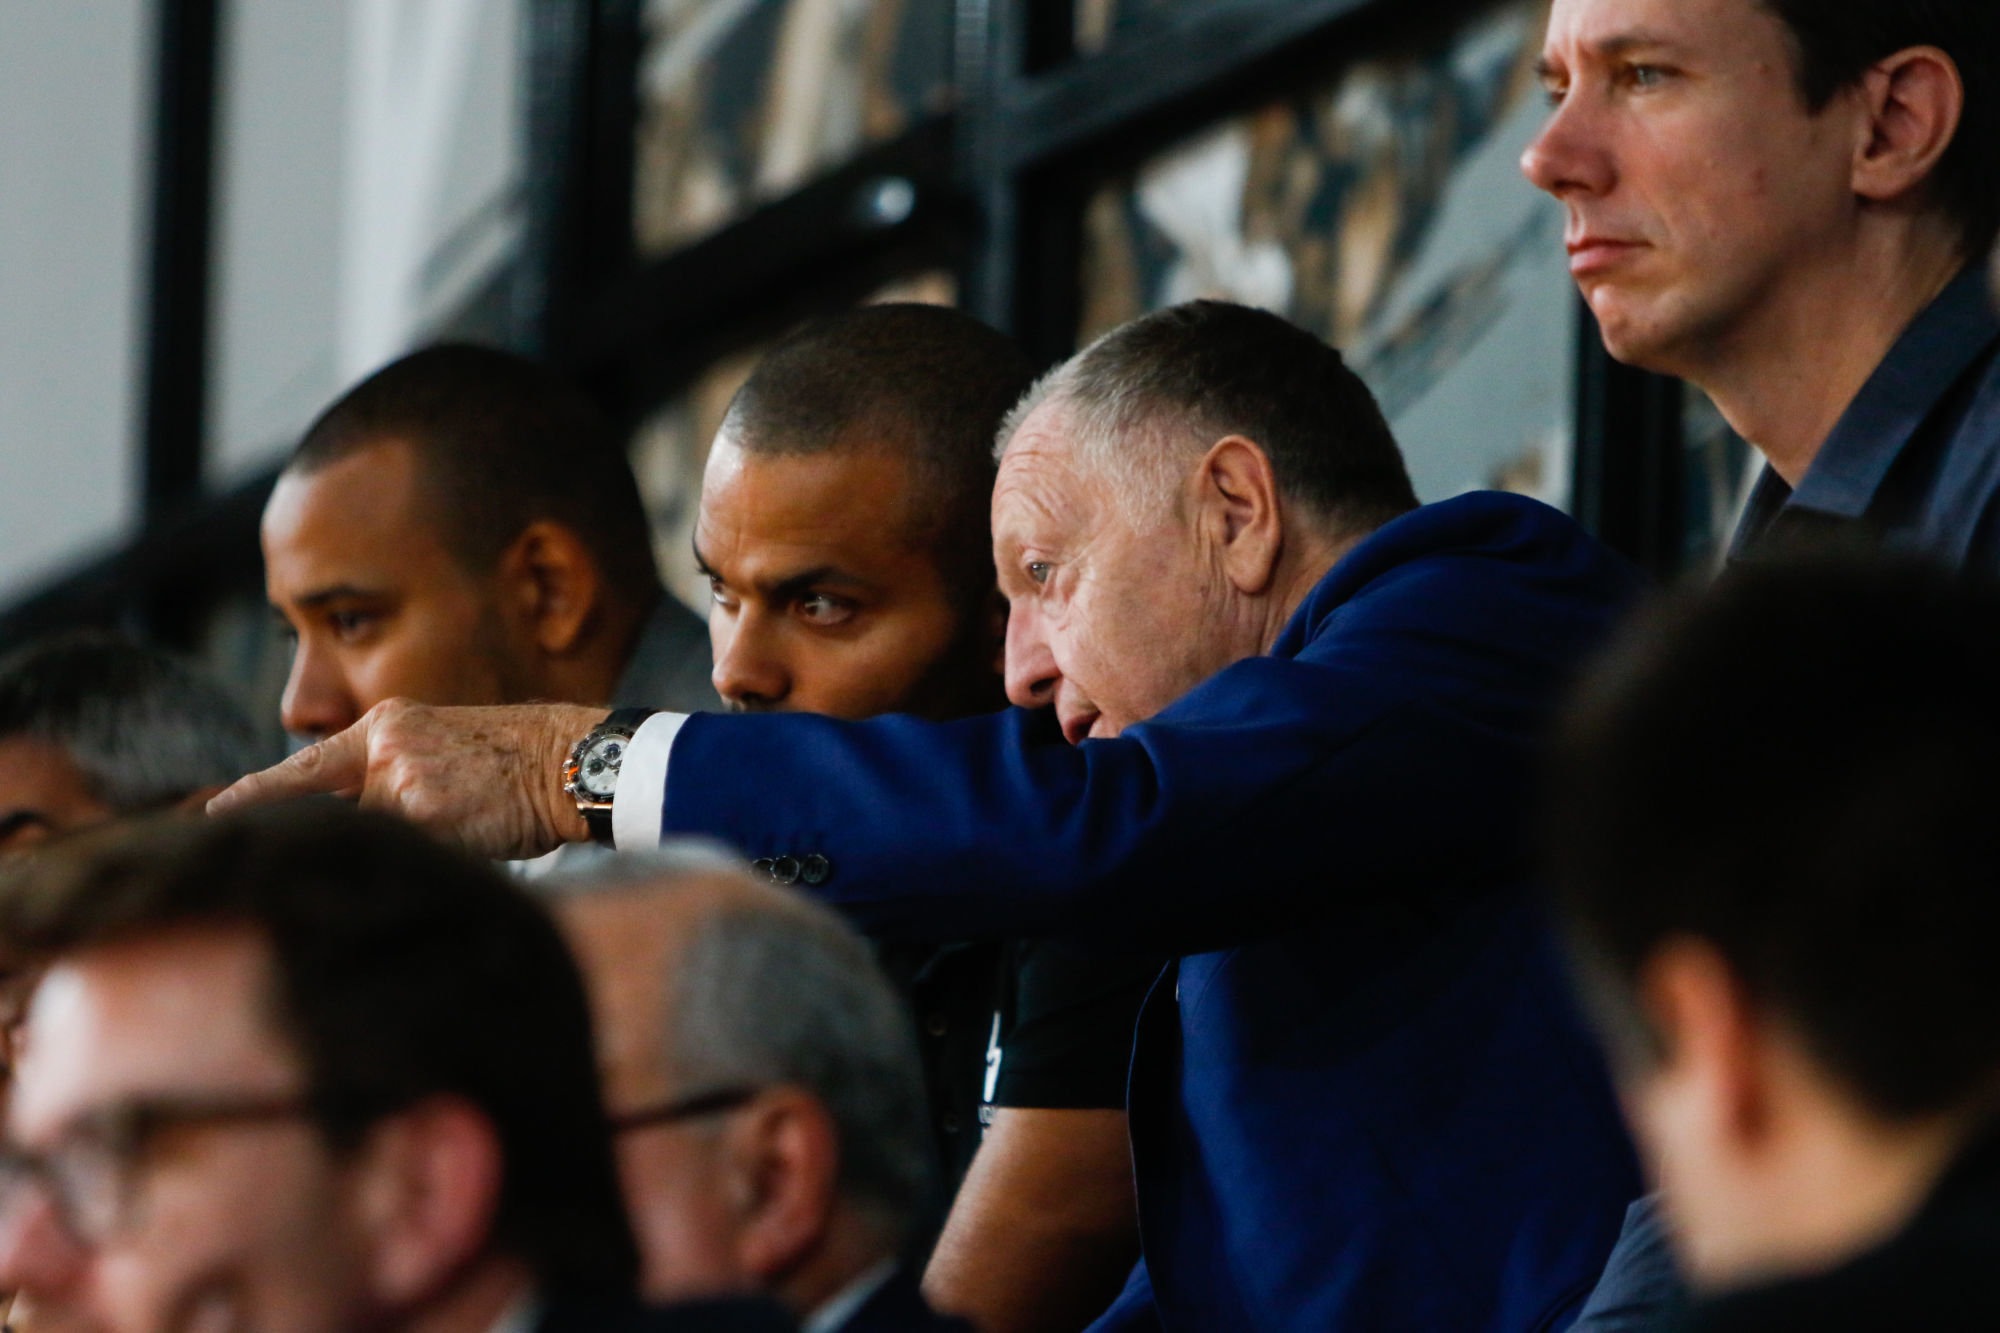 Tony PARKER President of LDLC ASVEL and Jean-Michel AULAS President of OL Groupe during the Euroligue match between Lyon ASVEL and Olympiakos at The Astroballe on October 4, 2019 in Villeurbanne, France. (Photo by Romain Biard/Icon Sport) - Tony PARKER - Jean-Michel AULAS - Astroballe - Villeurbanne (France)